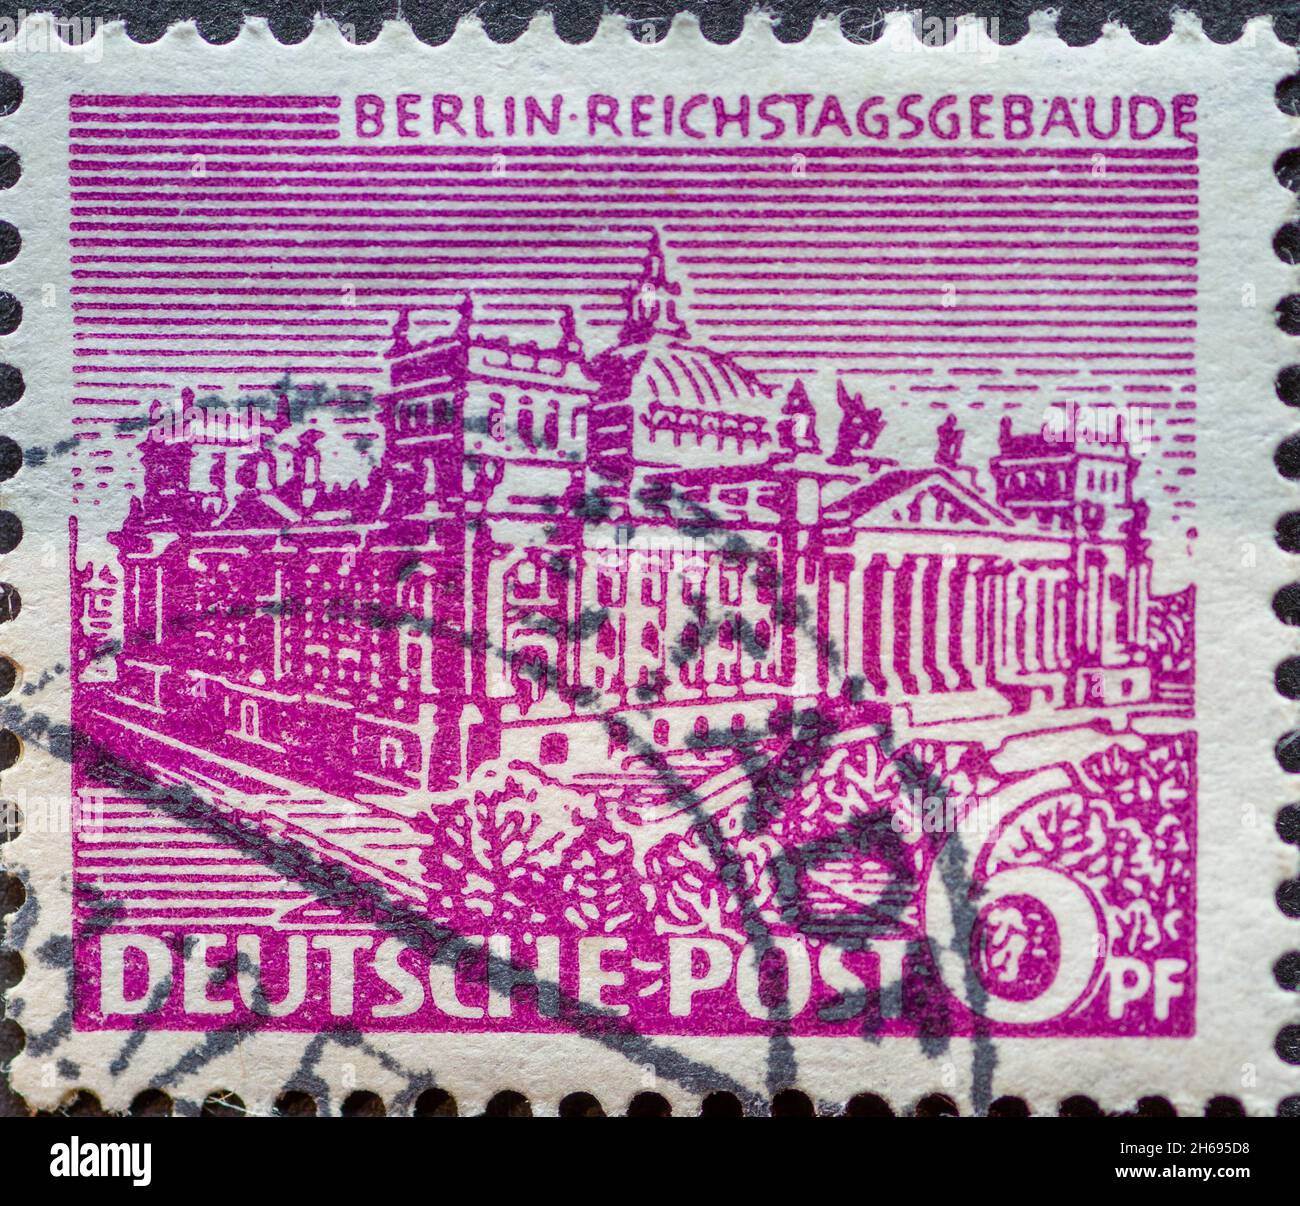 GERMANY, Berlin - CIRCA 1949: a postage stamp from Germany, Berlin showing Berlin buildings. Berlin Reichstag building in purple Stock Photo